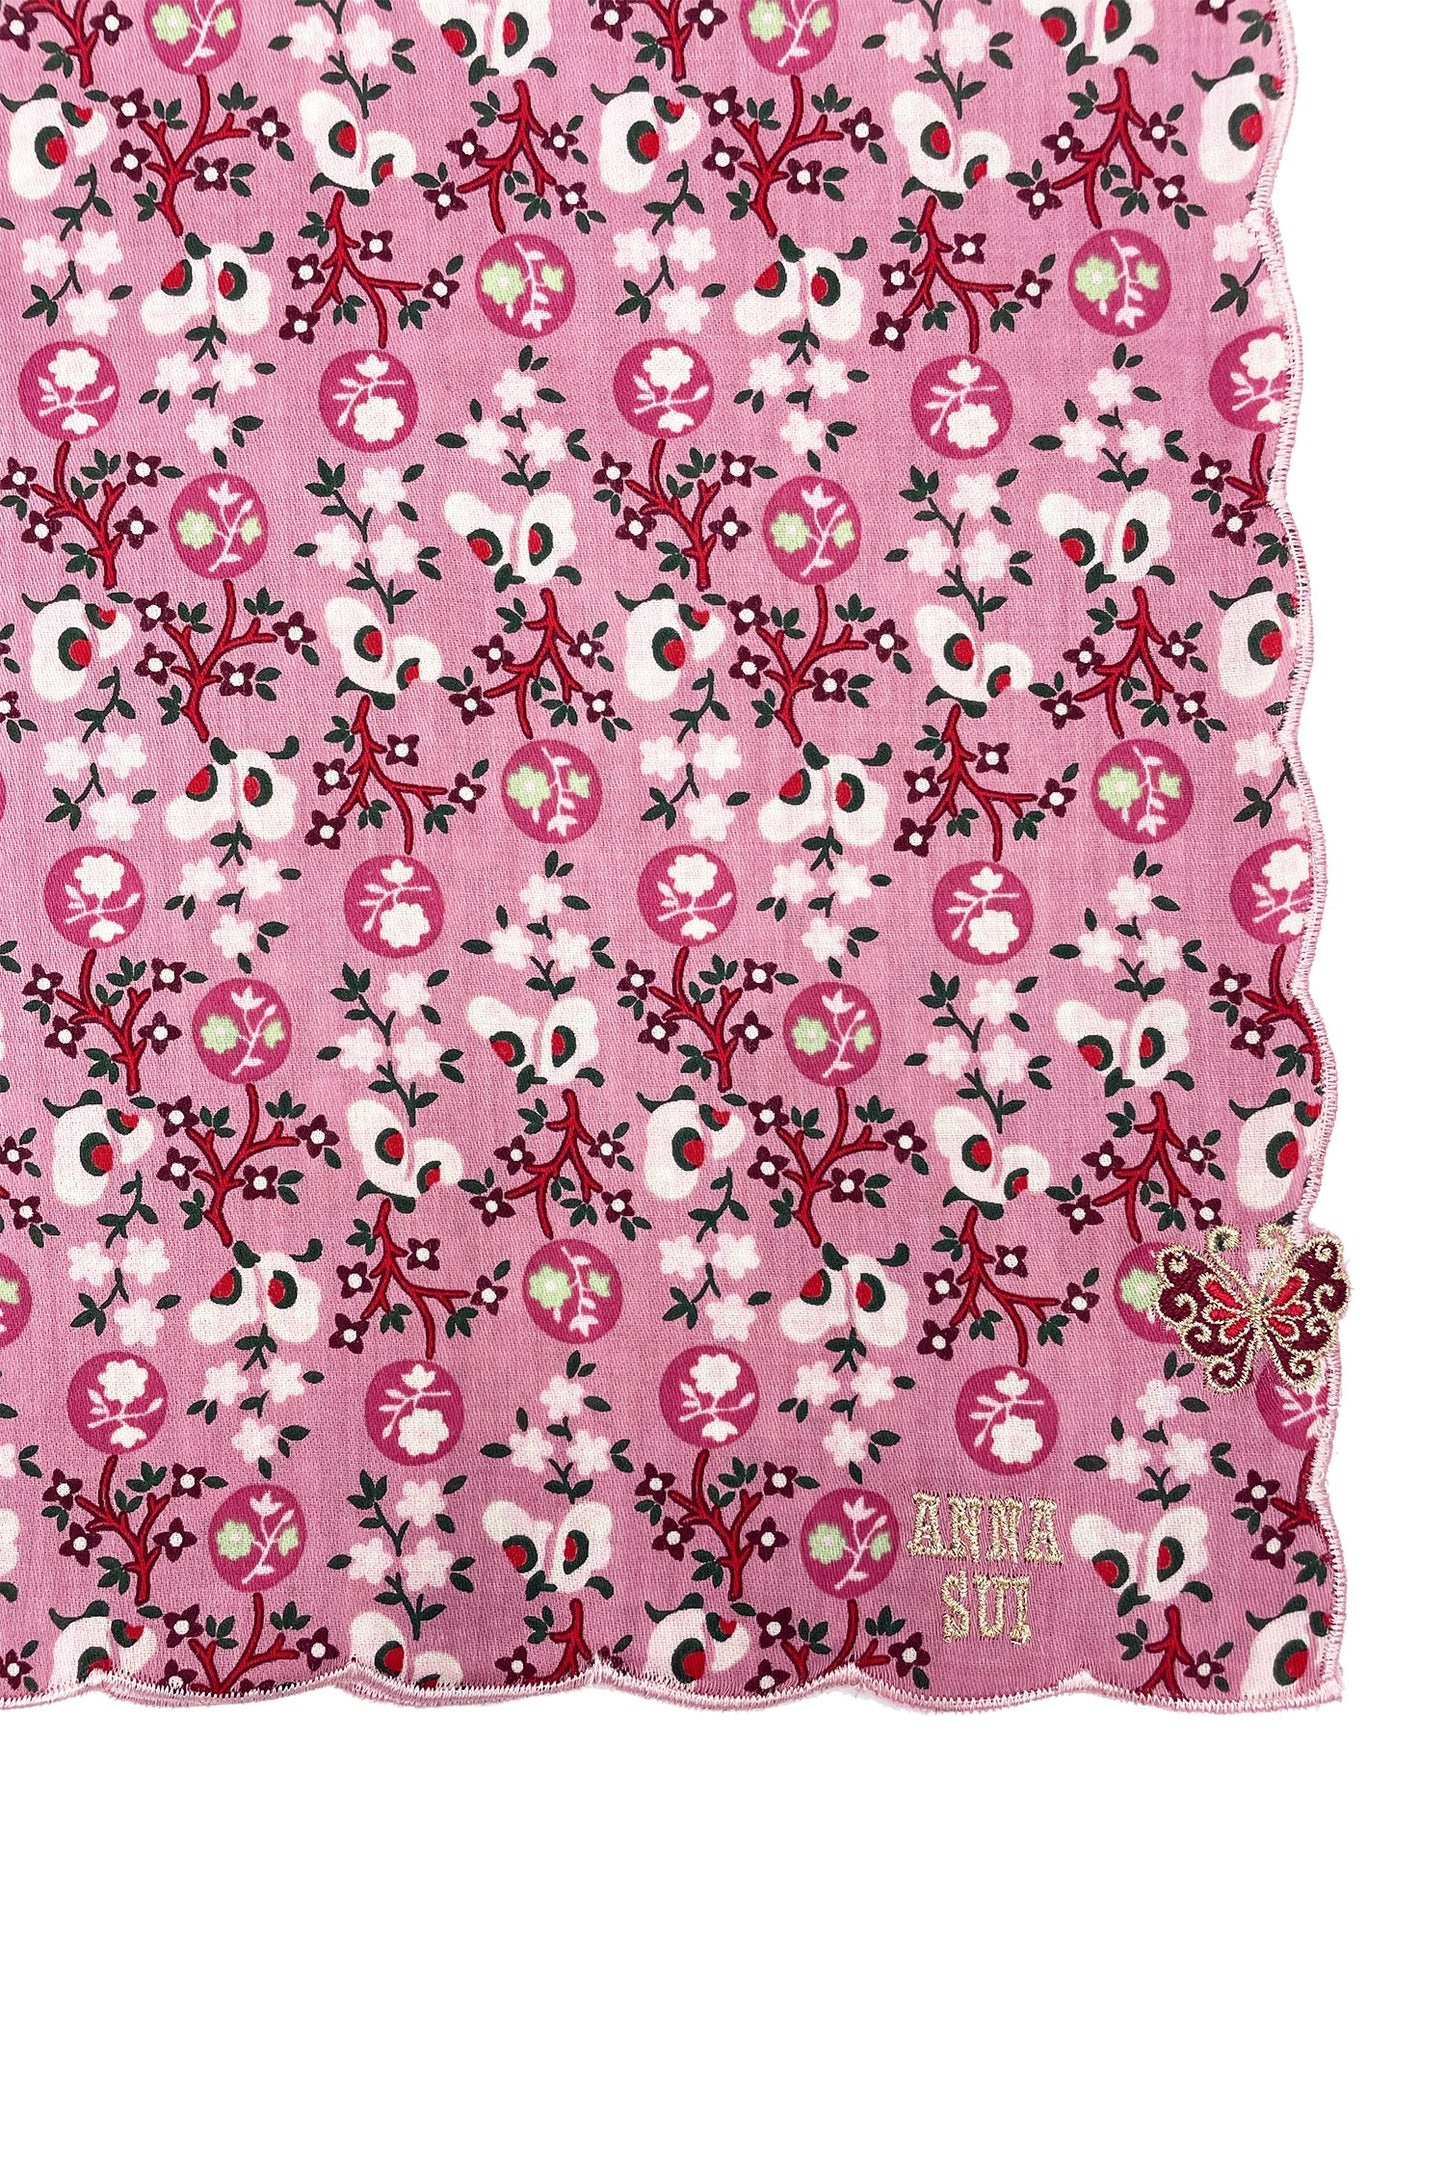 Handkerchief pink detail of repetitive pattern of white butterflies, and pink/white floral, Anna’s label